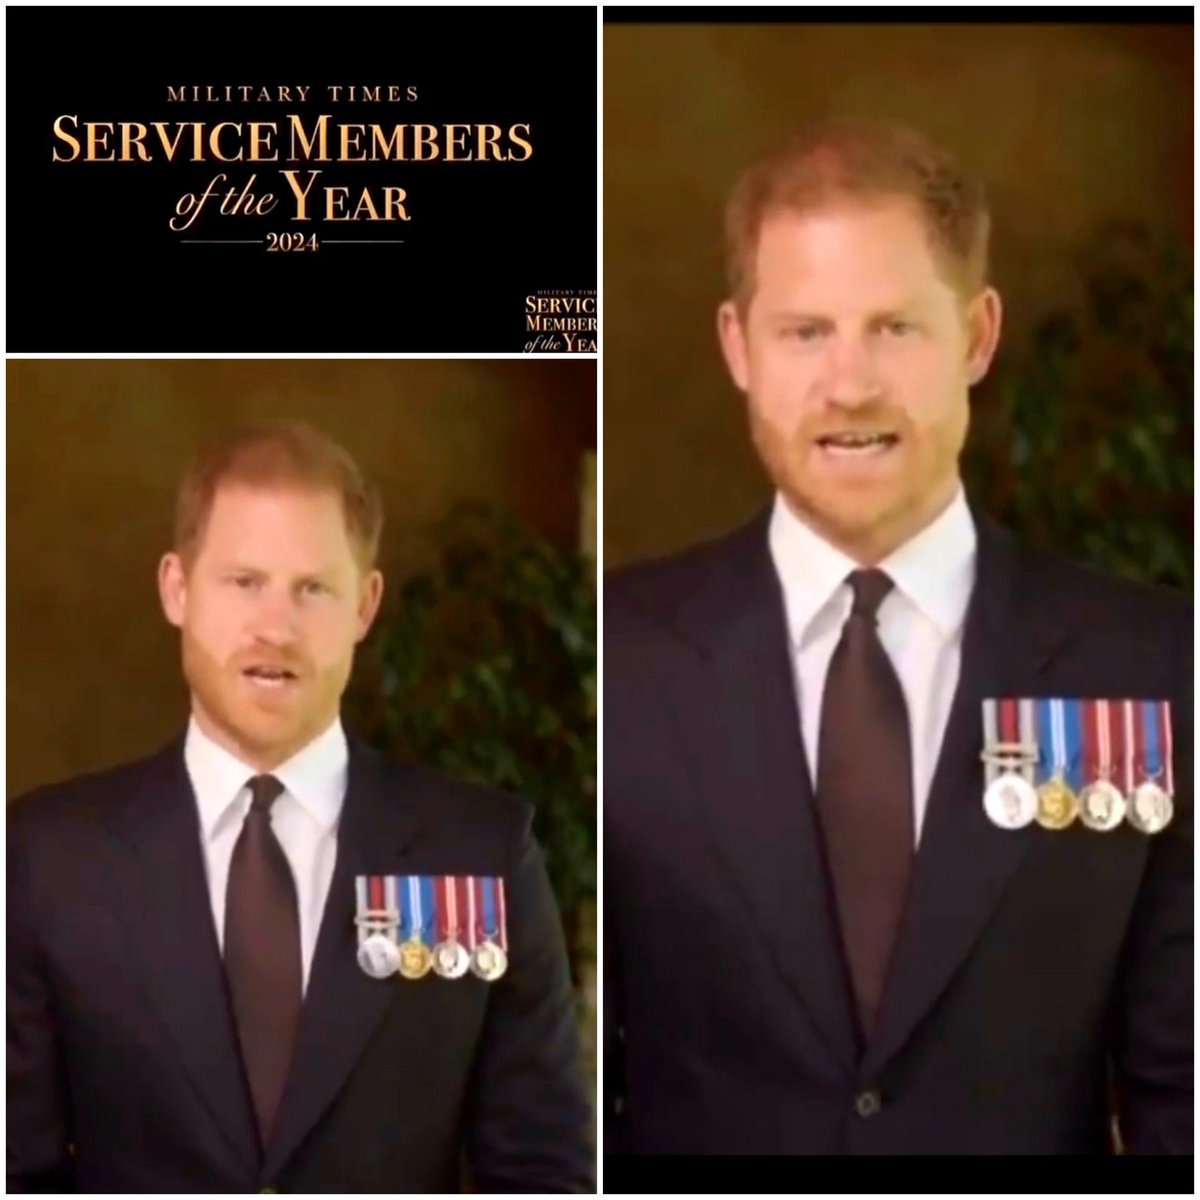 Captain Prince Harry, a veteran, spots another soldier in service and acknowledges them. Service is universal; it's all about serving others.